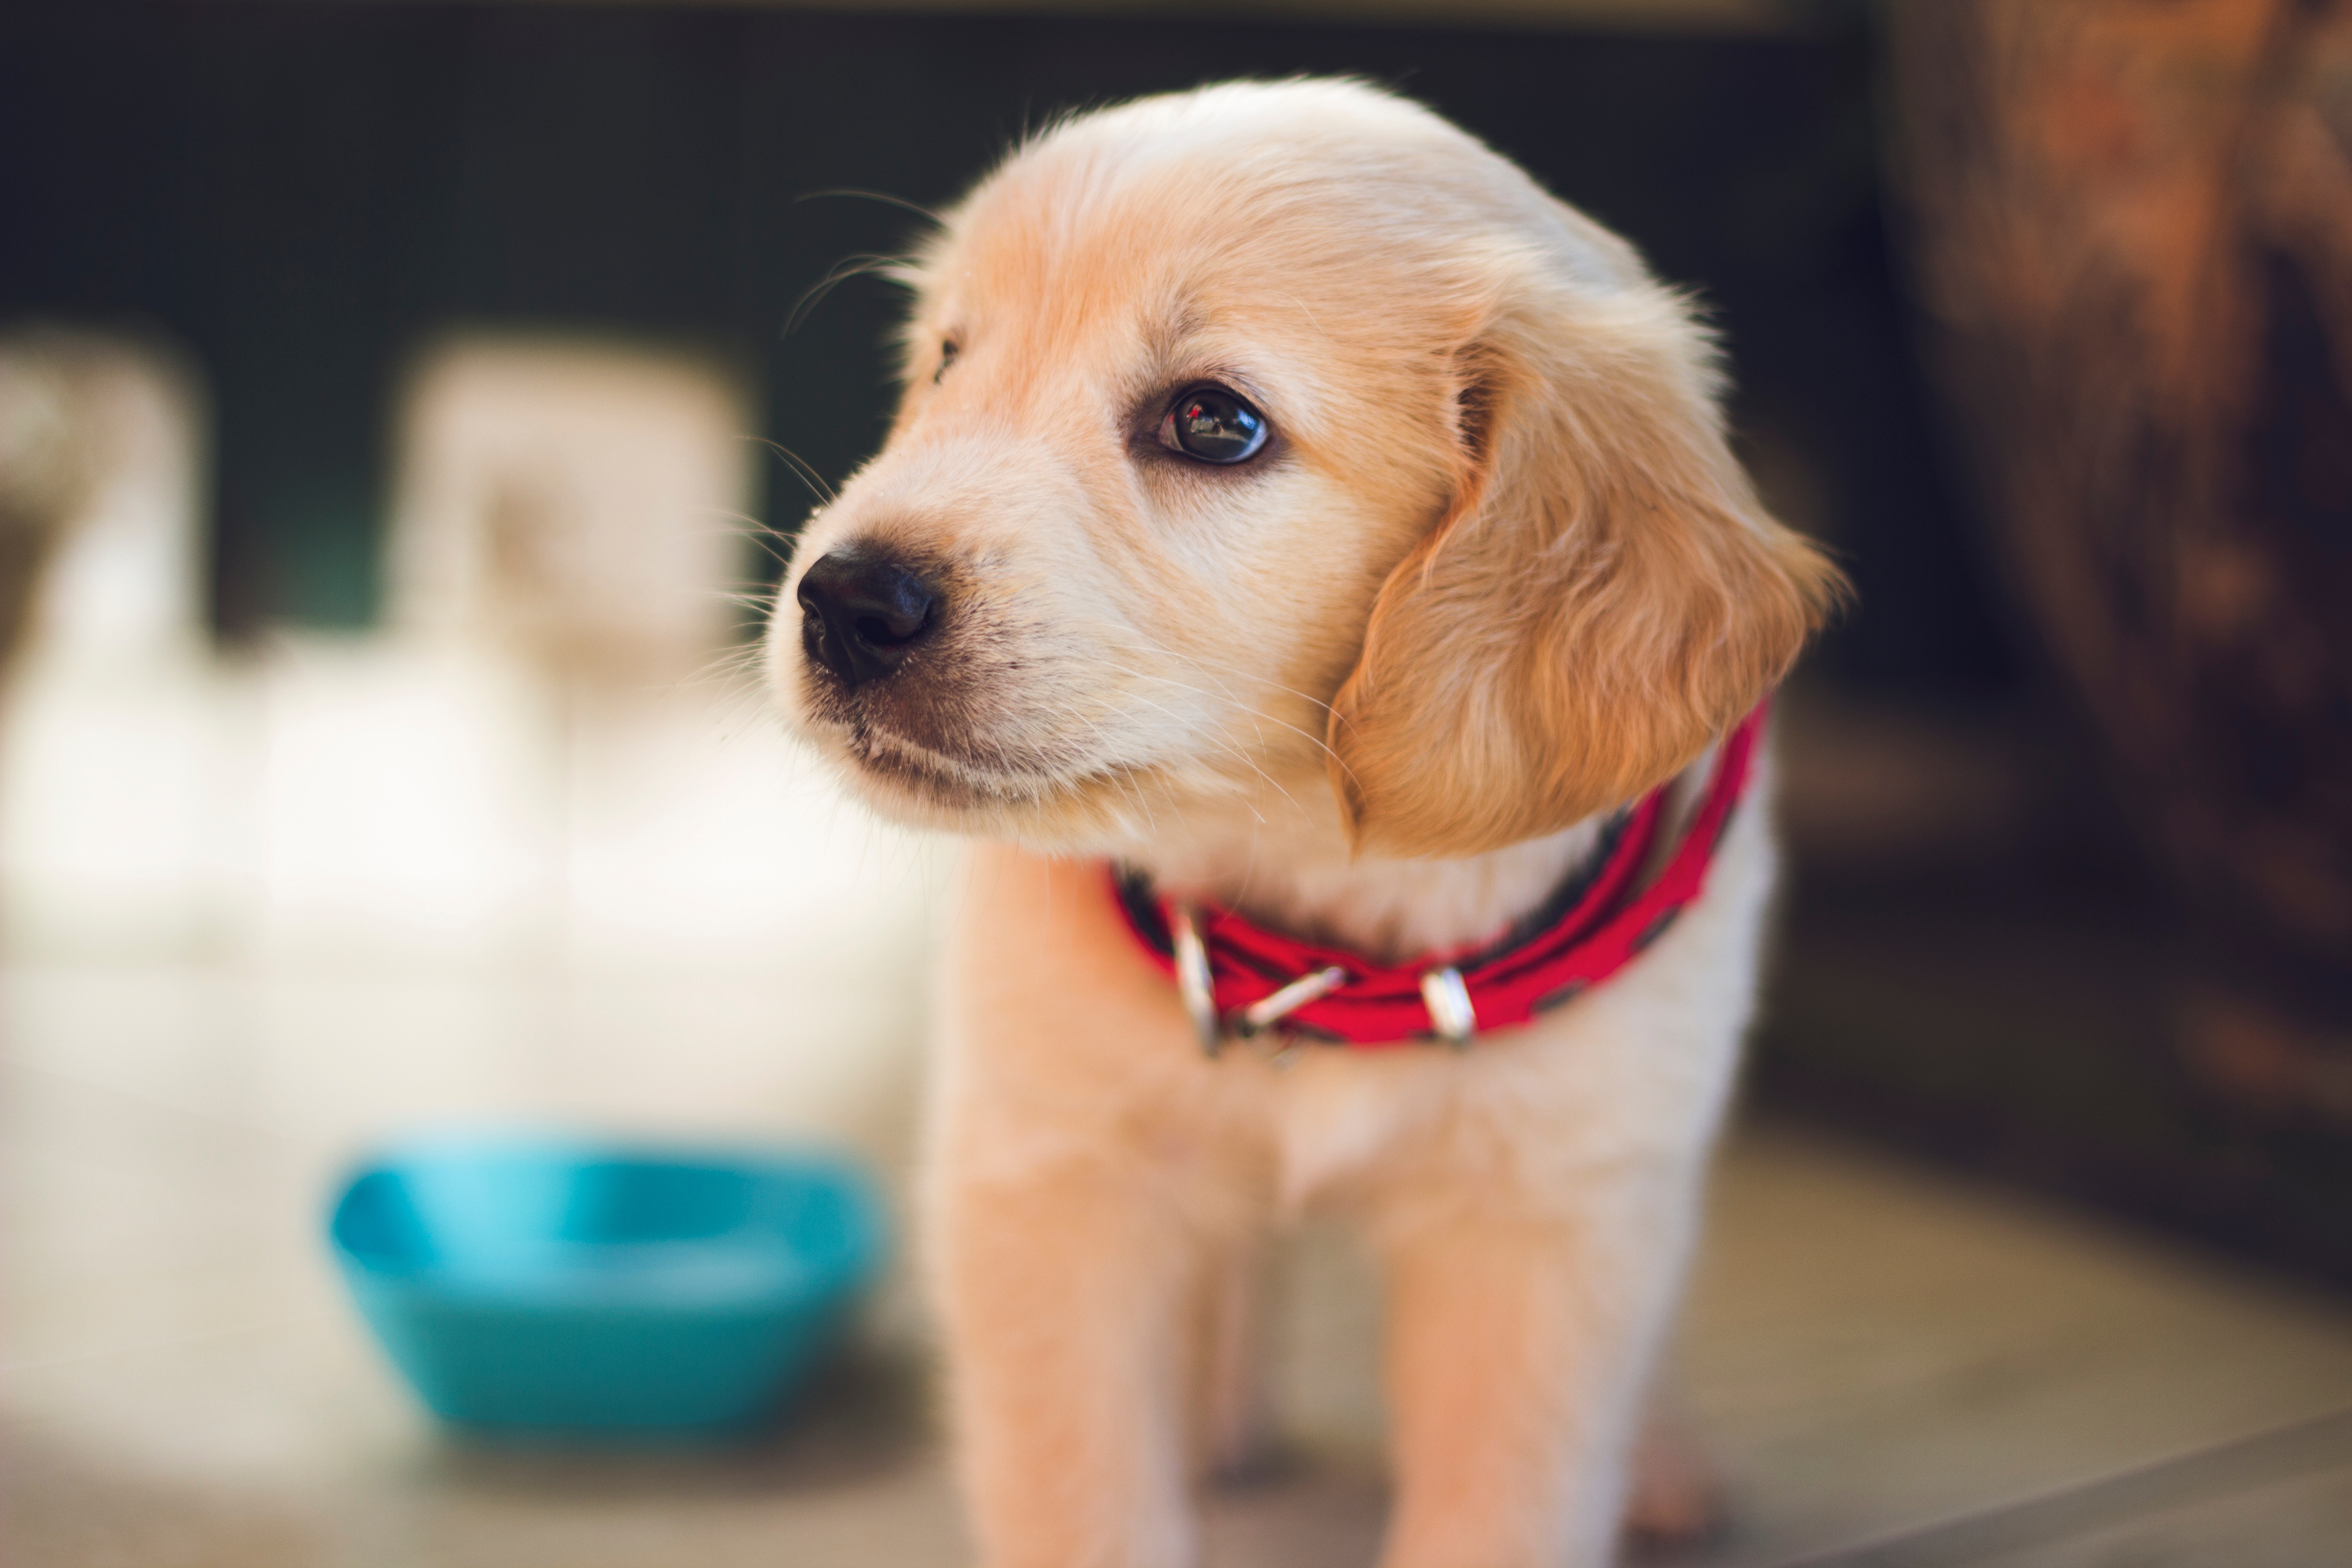 Is owning a dog good for your health?